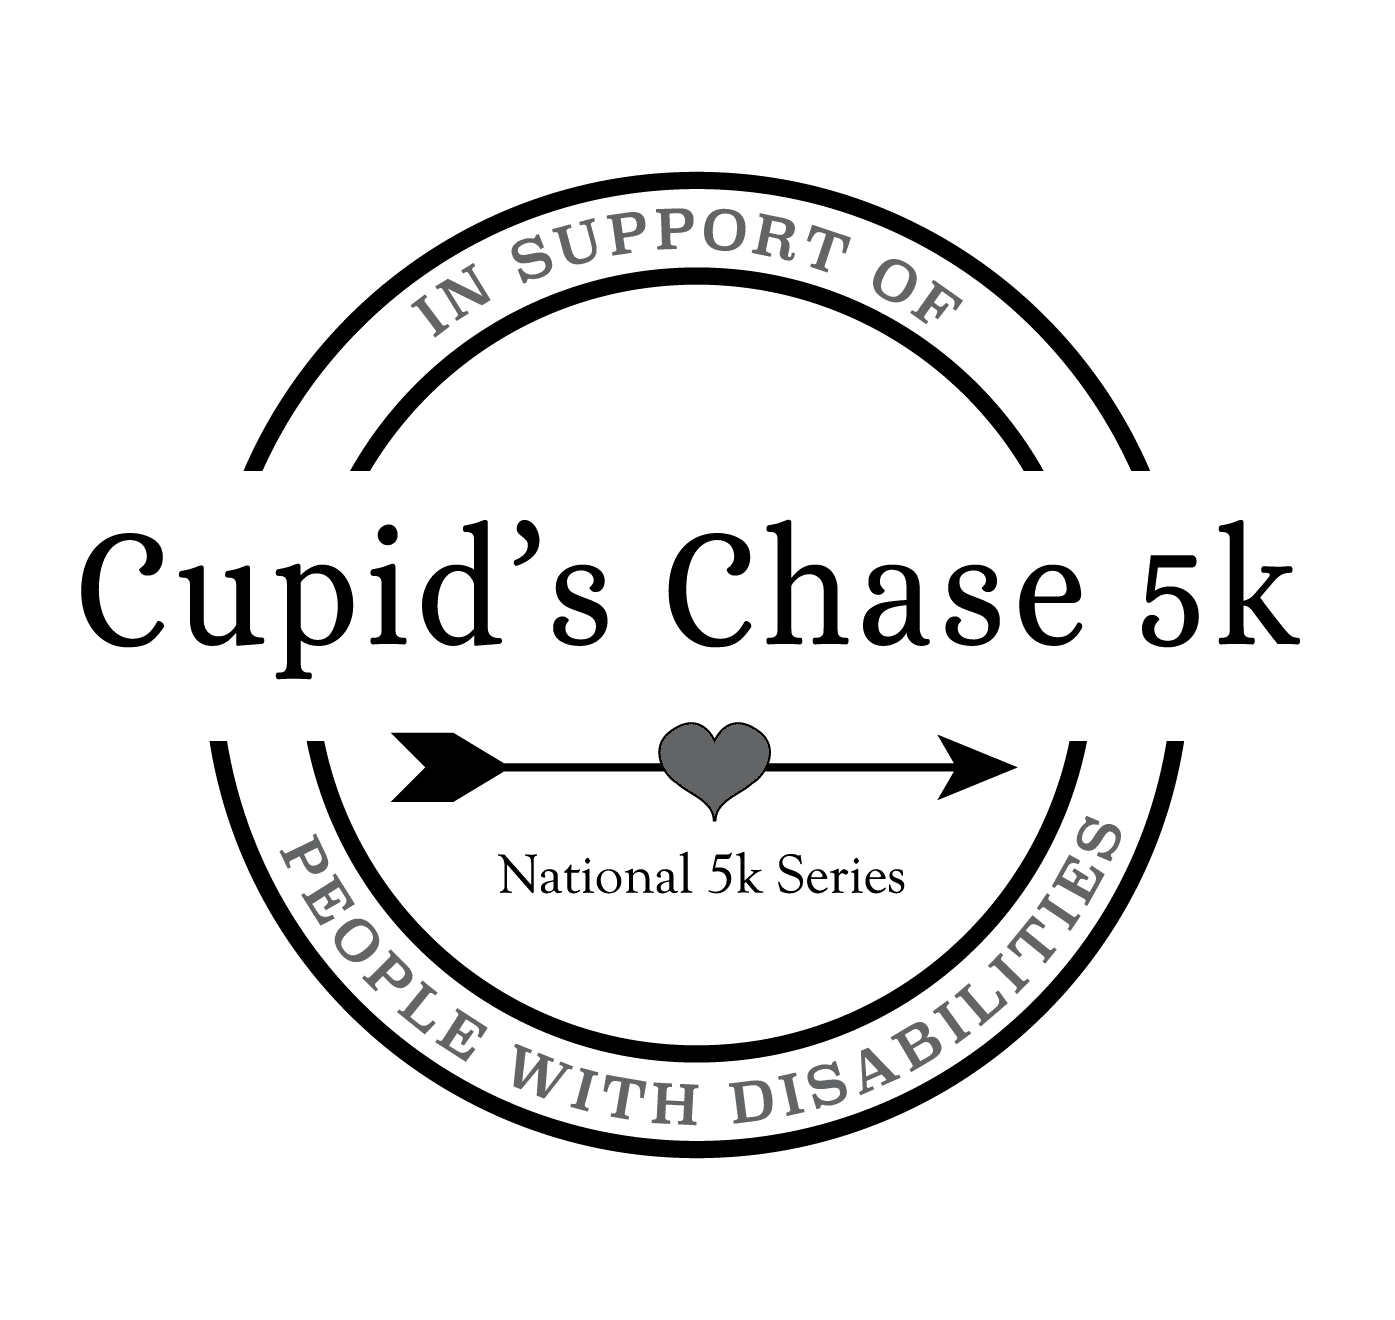 Cupid's Chase 5k Logo National 5k Series In support of people with disabilities - grayscale